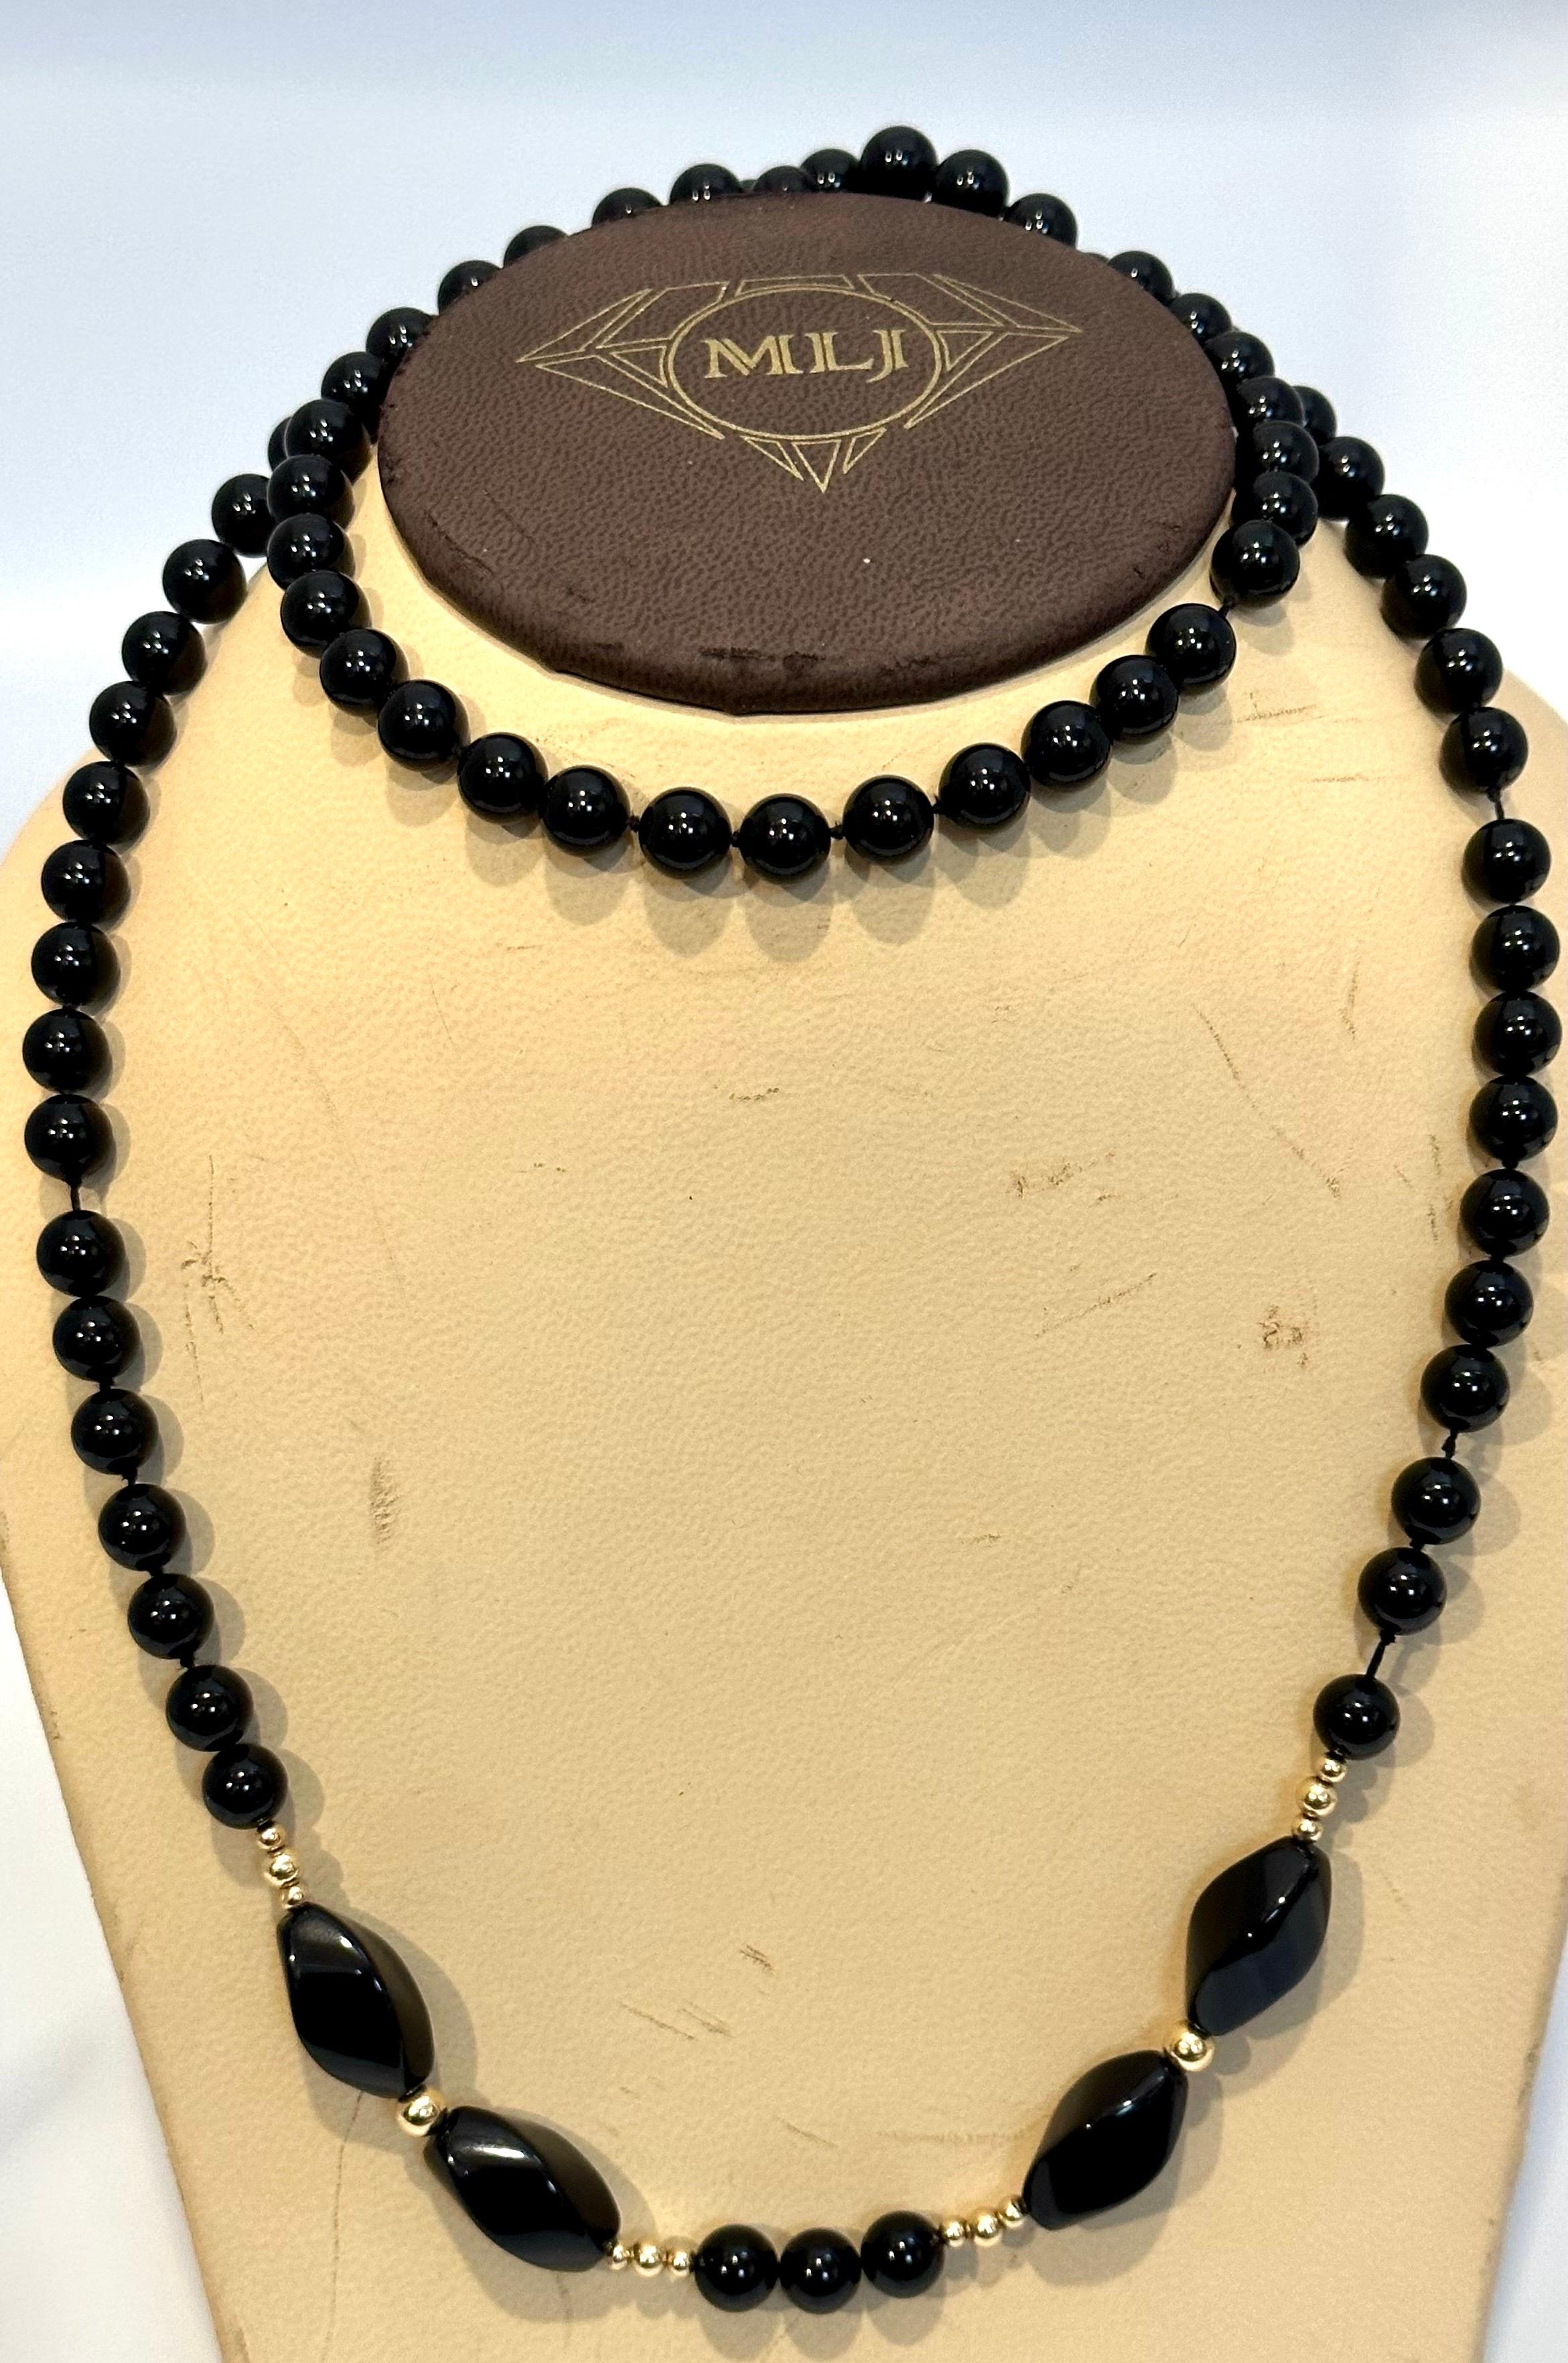 Women's Round 8 MM Bead Black Onyx & 14 Karat Gold Bead Necklace 32 Inch Long For Sale